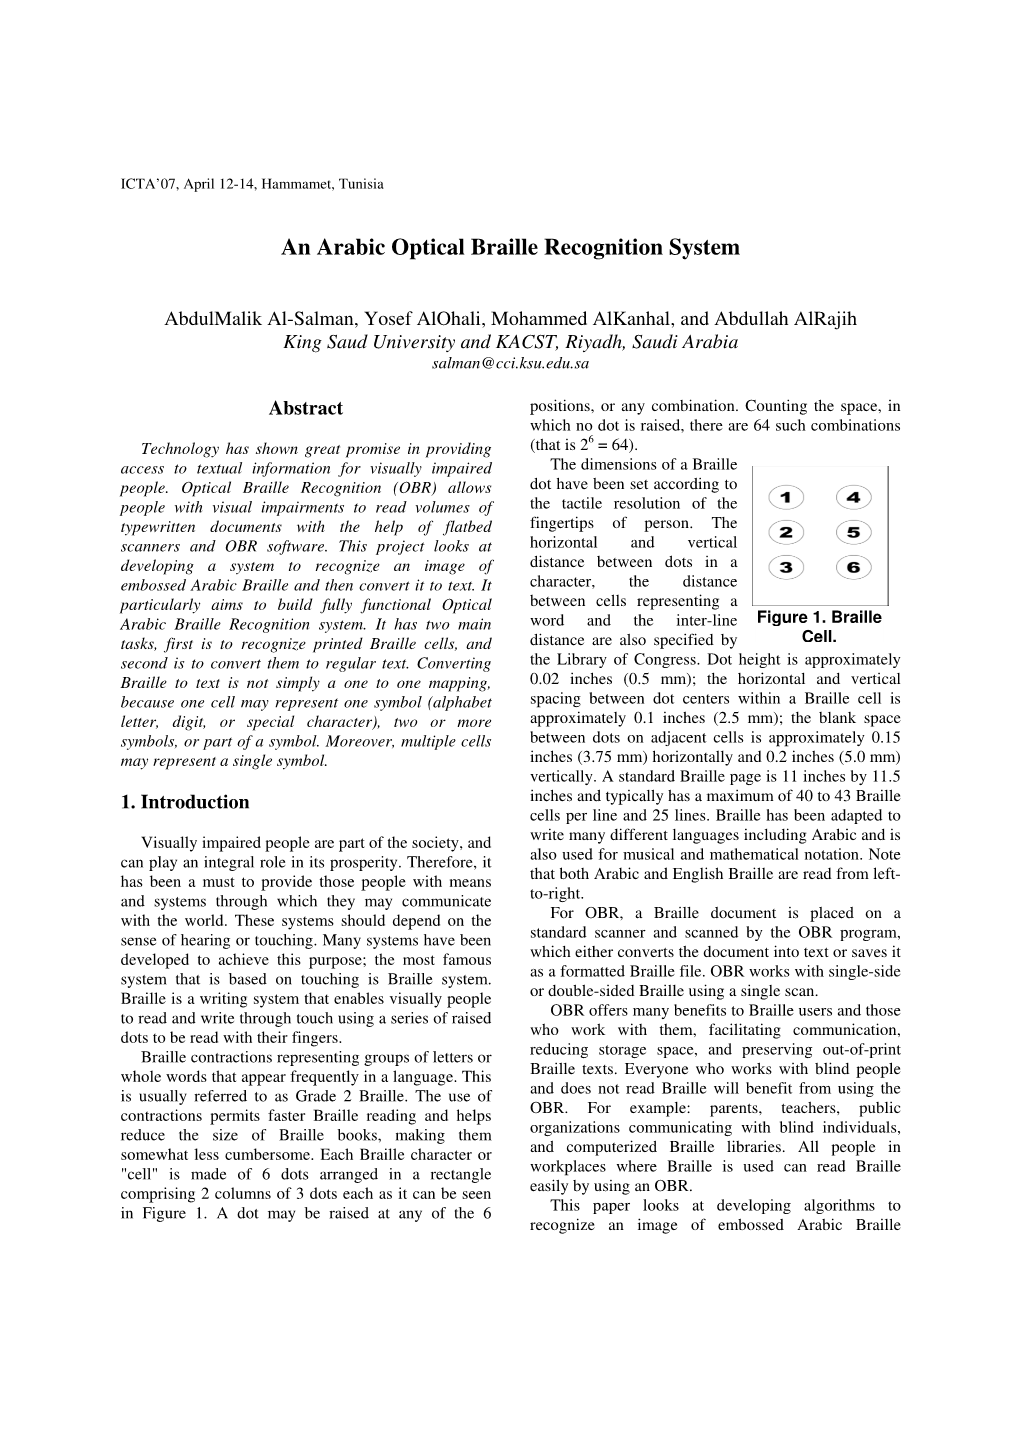 An Arabic Optical Braille Recognition System